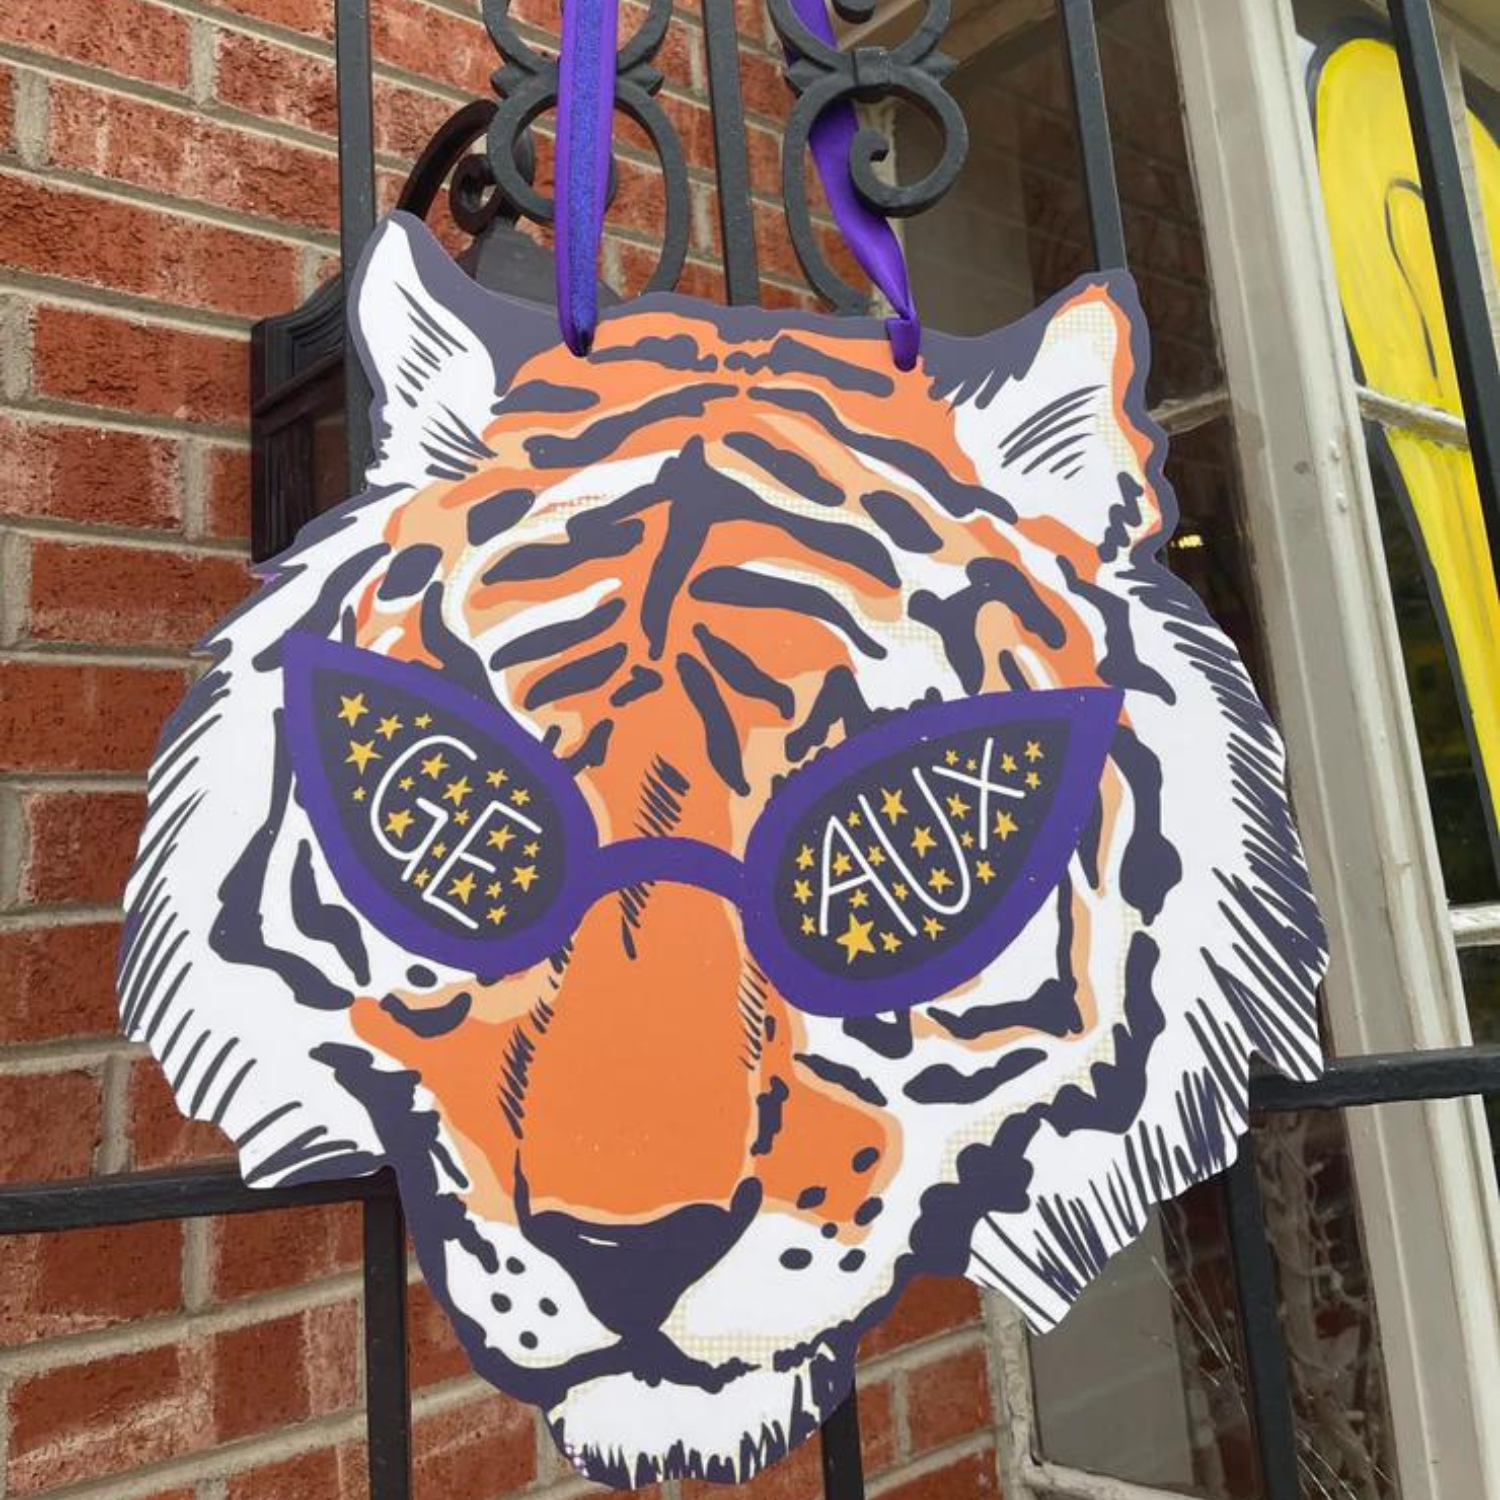 LSU Beaded Purse Straps, Louisiana State University football, Tailgate,  Geaux Tigers, Game day accessories, Geaux Tigers, Stadium, Bag Strap